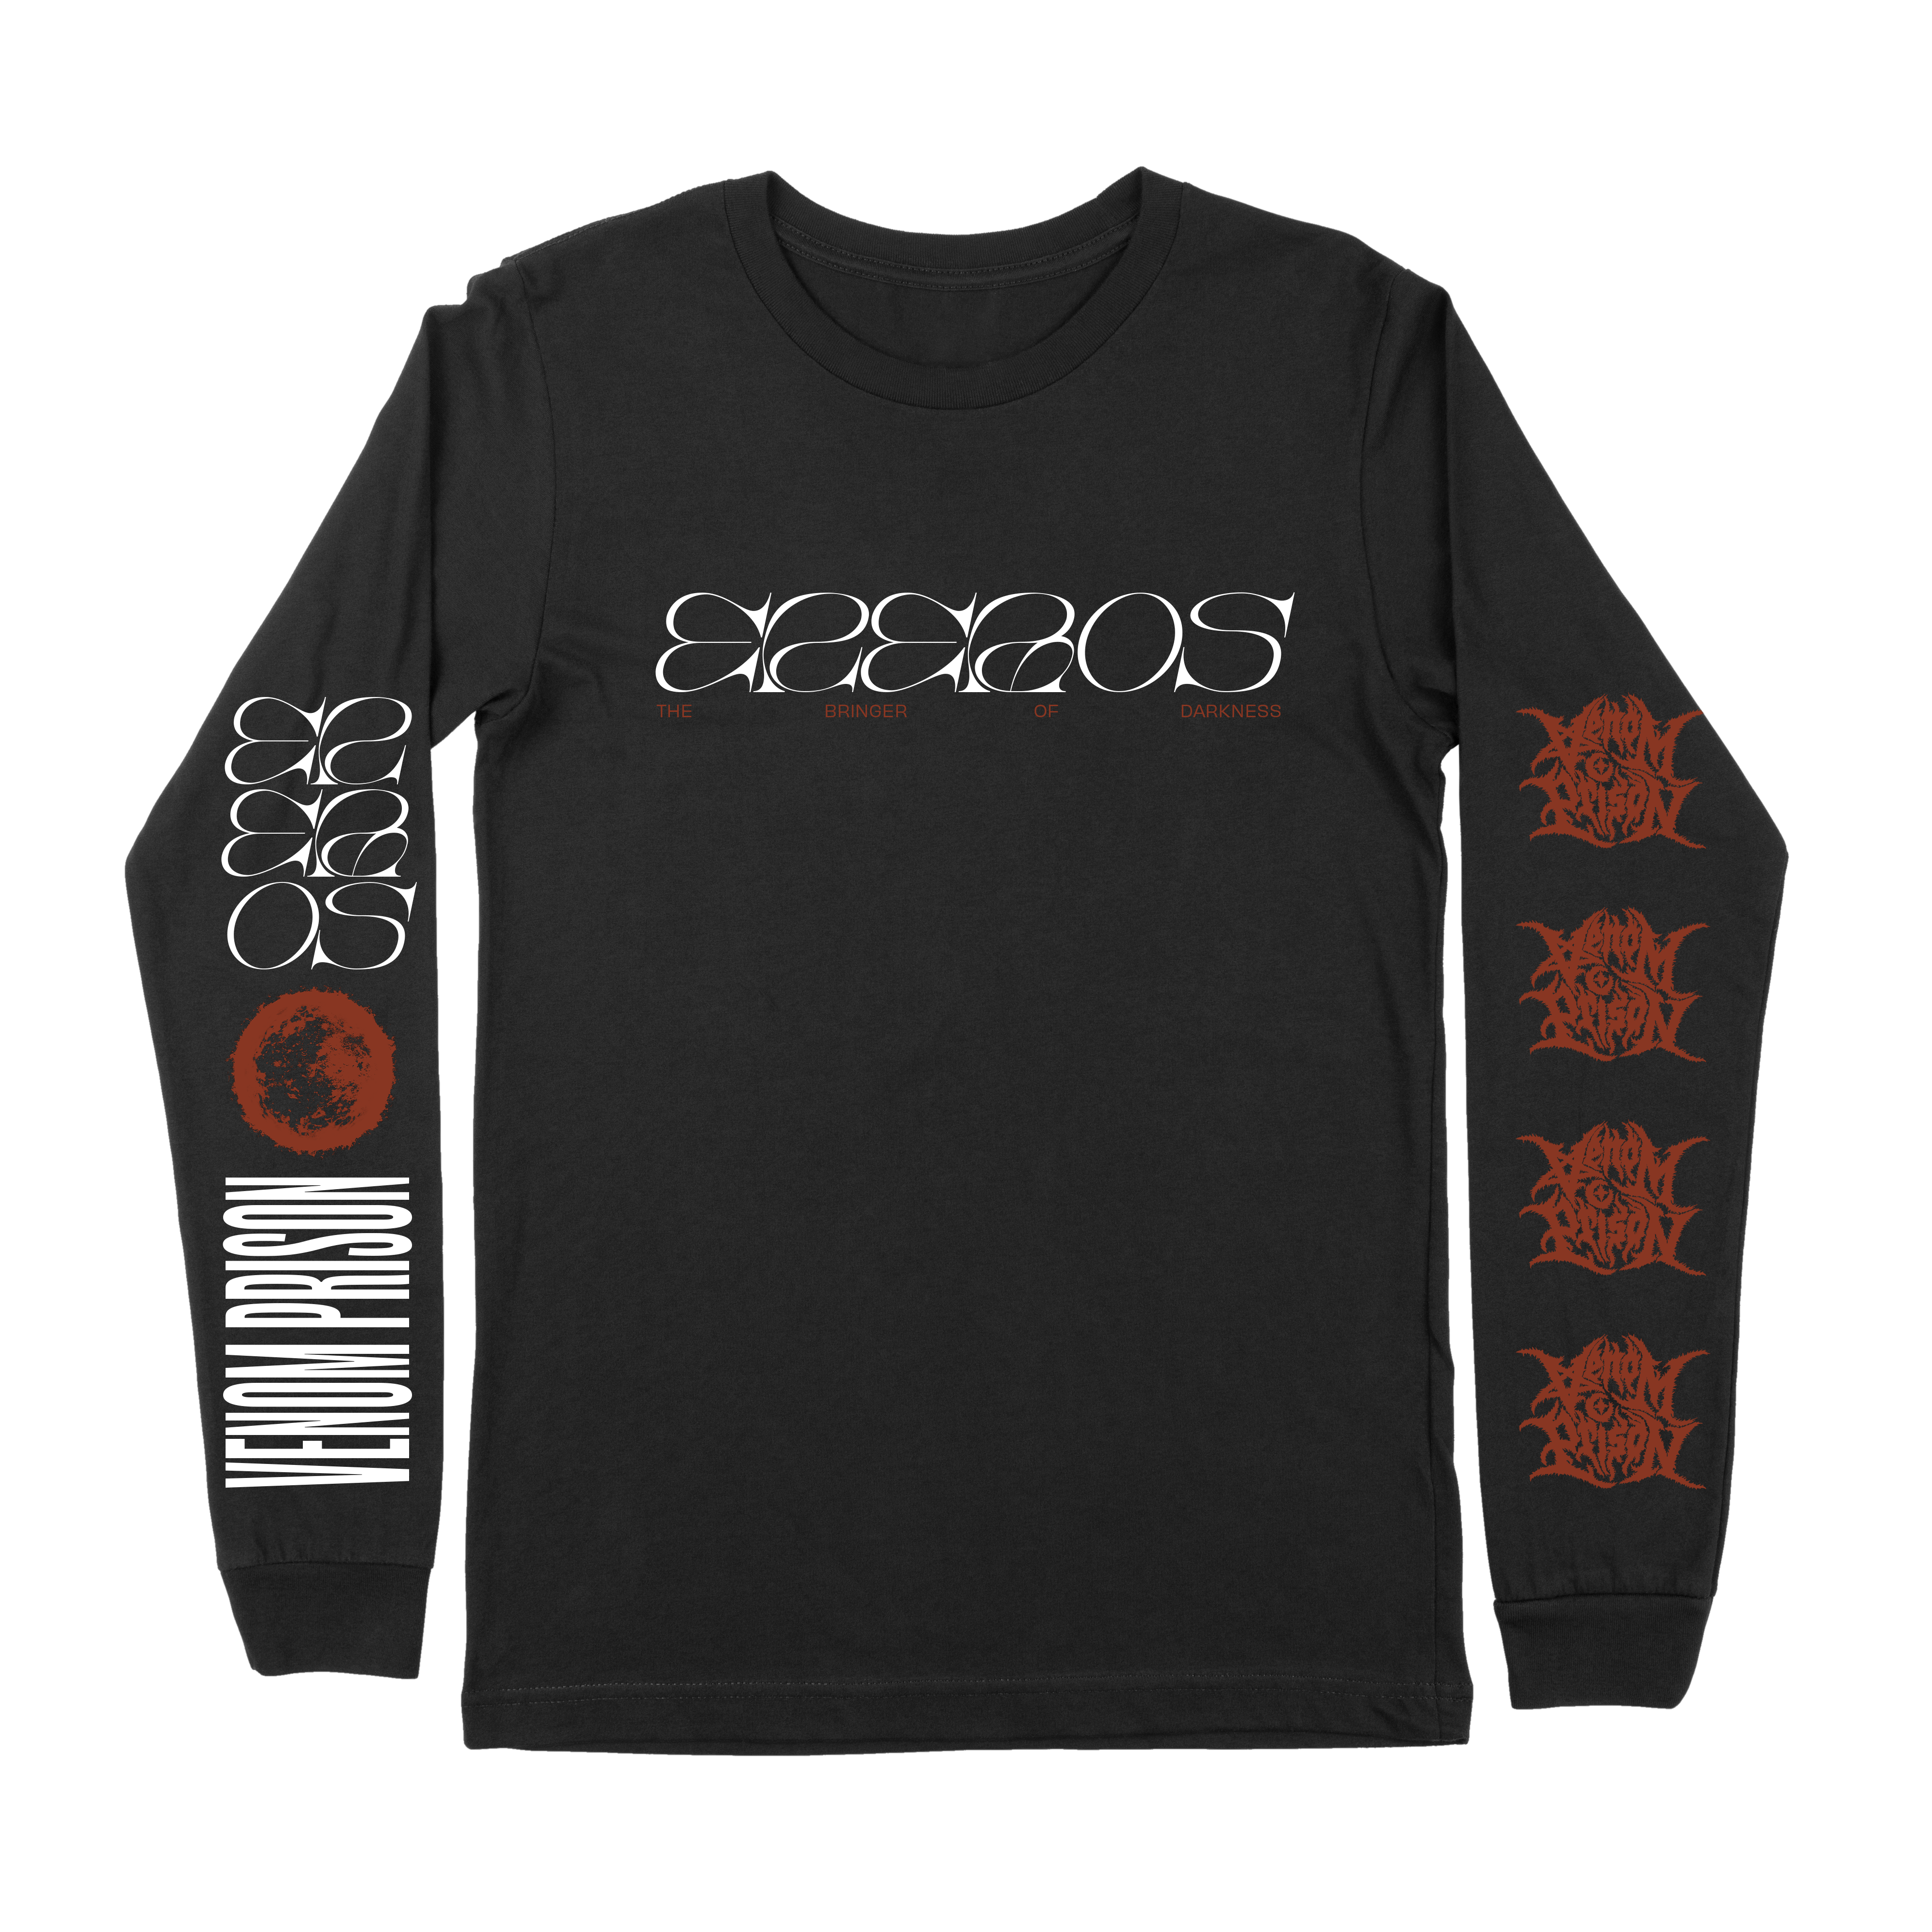 The Bringer Of Darkness Long Sleeve